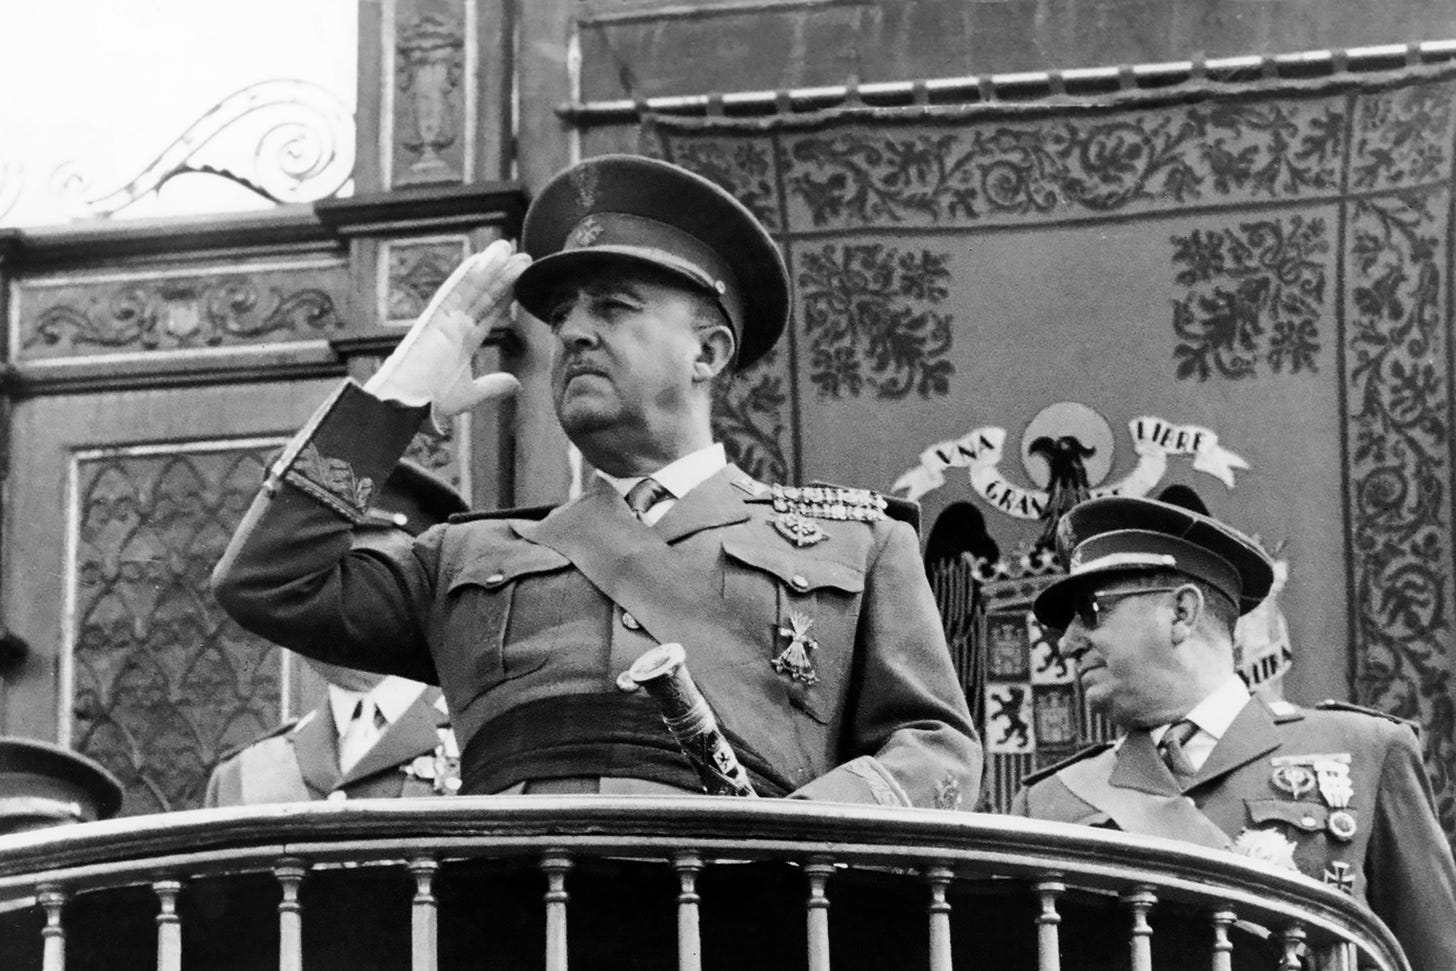 Spain makes it a crime to apologise for Franco or glorify civil war